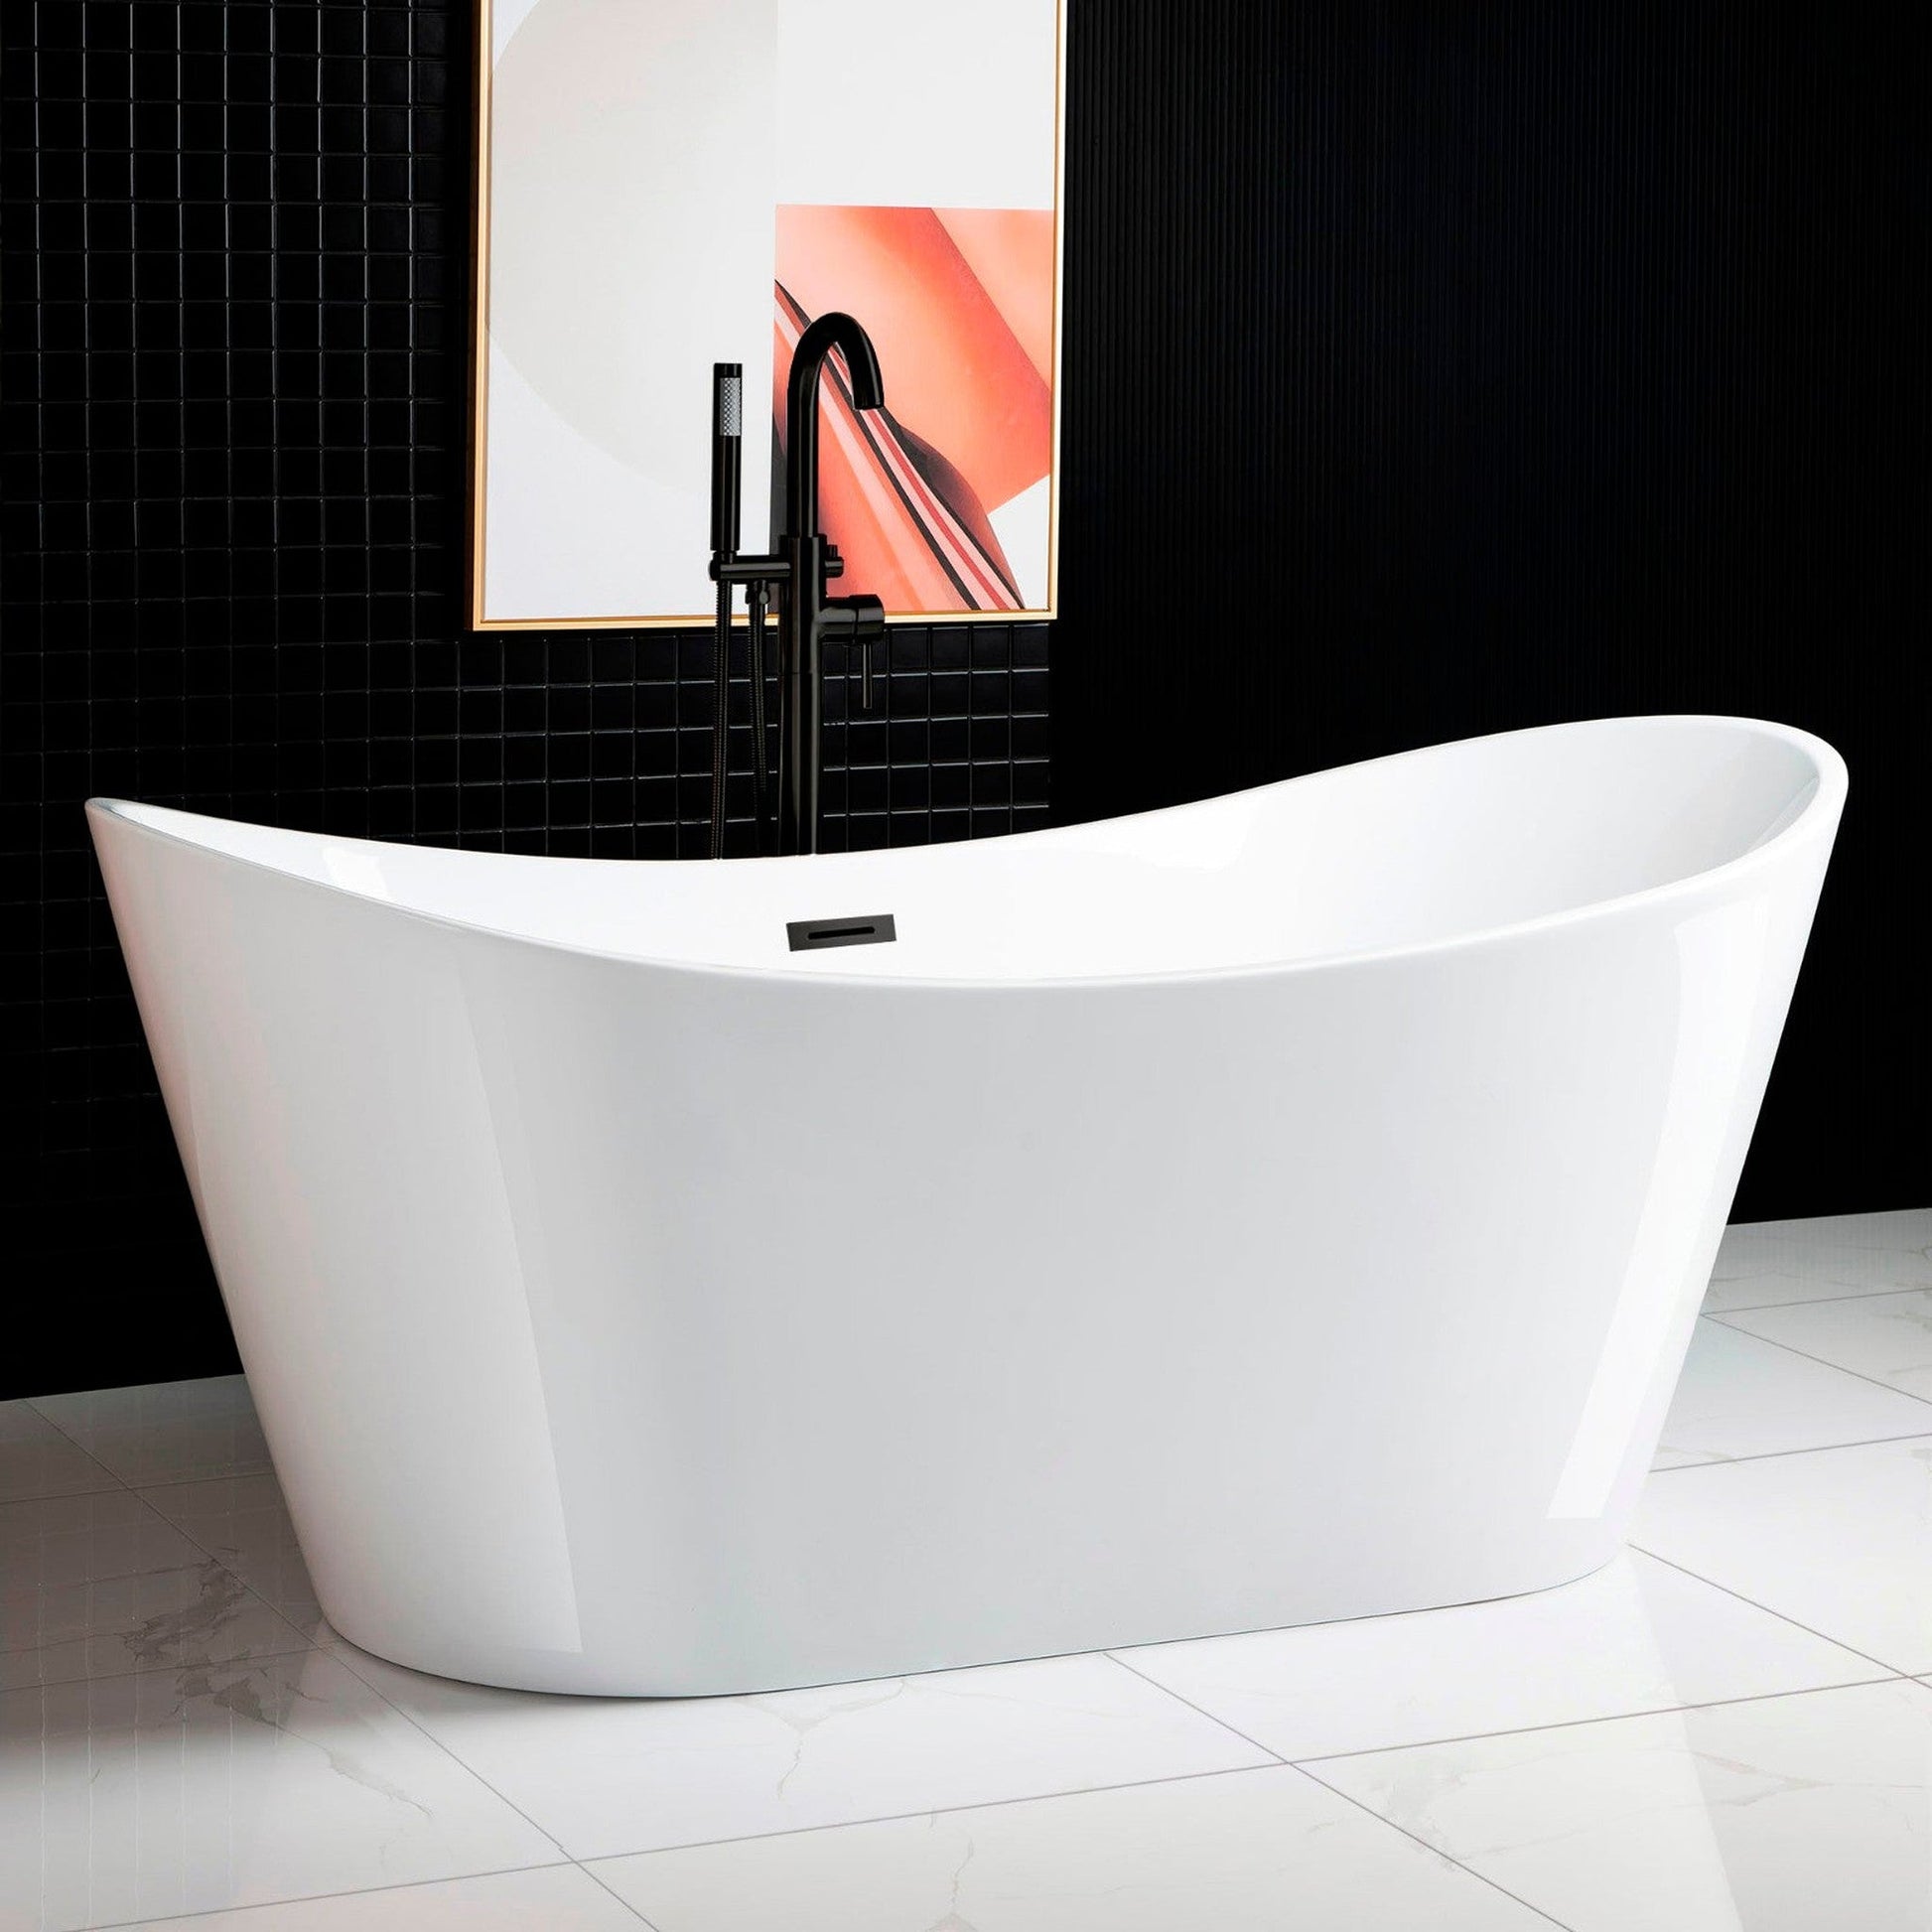 WoodBridge B0010 67" White Acrylic Freestanding Contemporary Soaking Bathtub With Matte Black Drain, Overflow, F0072MBVT Tub Filler and Caddy Tray